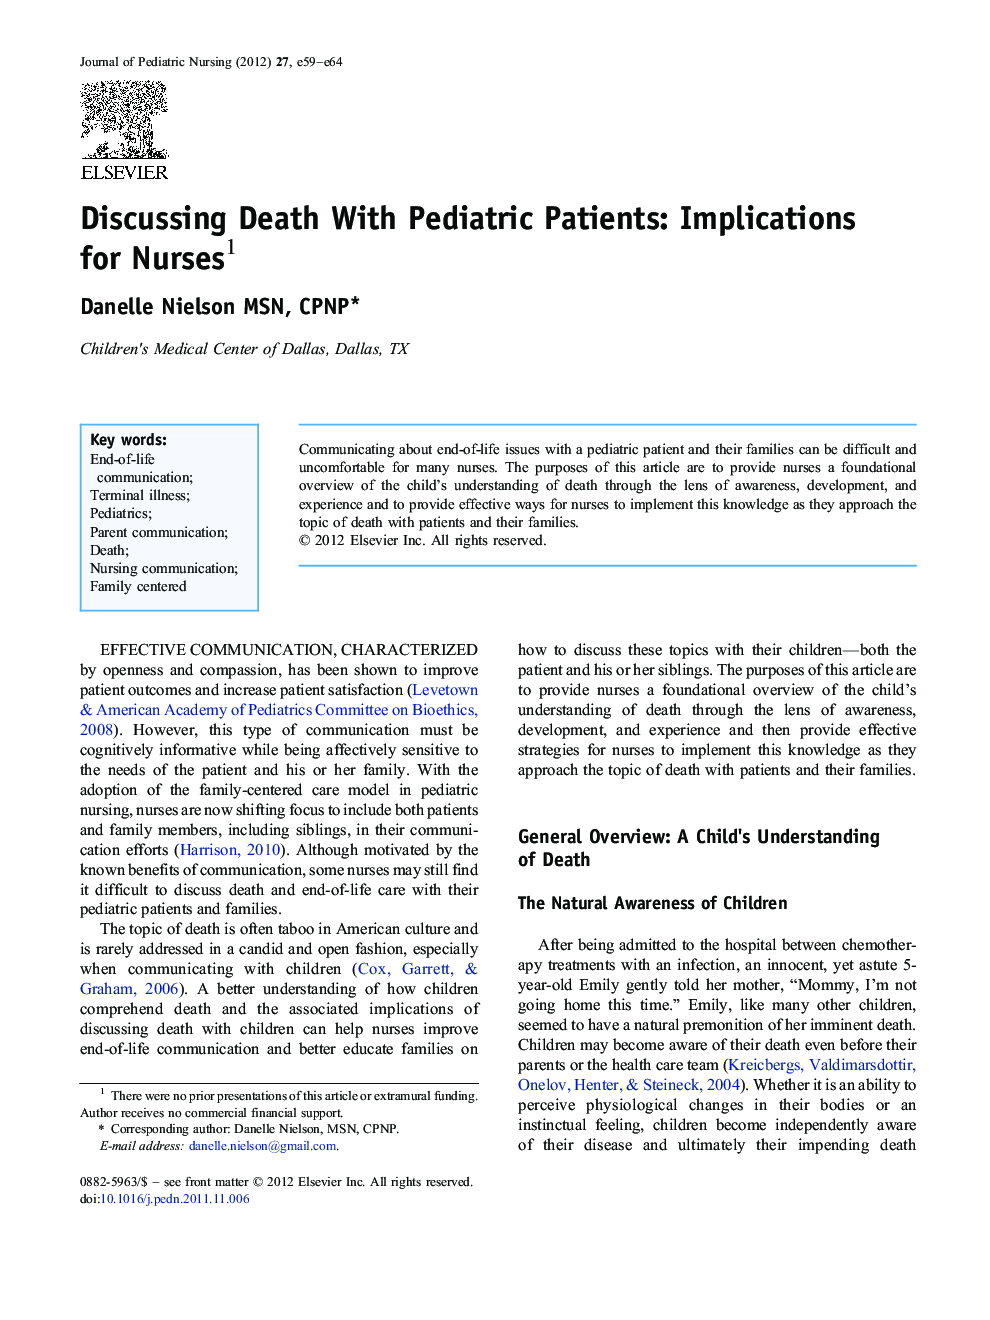 Discussing Death With Pediatric Patients: Implications for Nurses 1